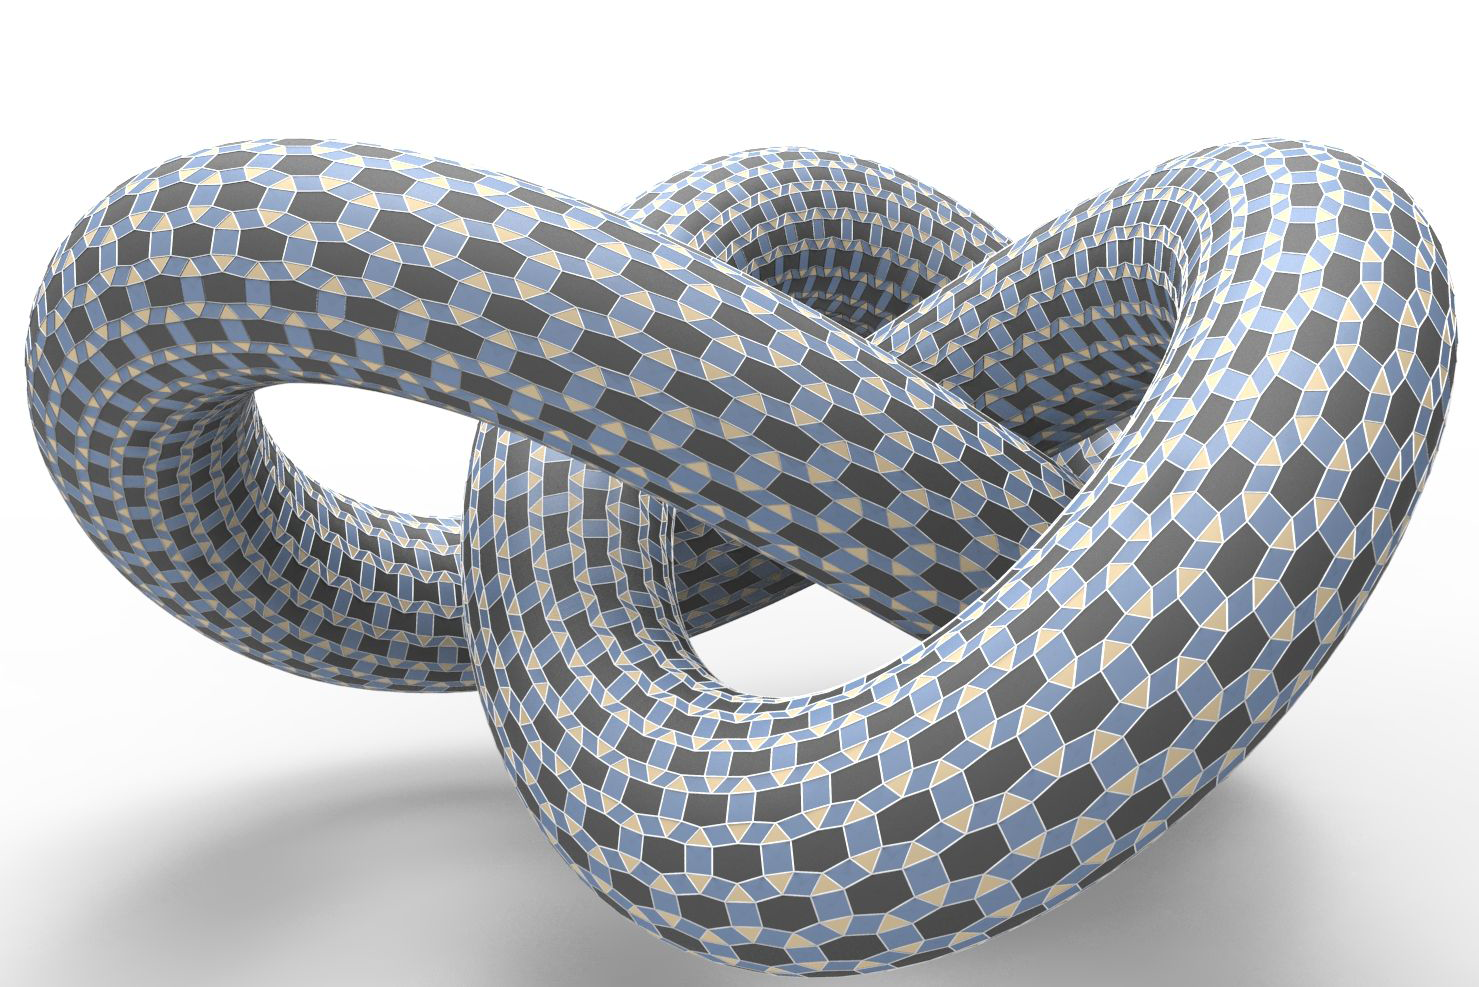 Polyhedral patterns on a knot